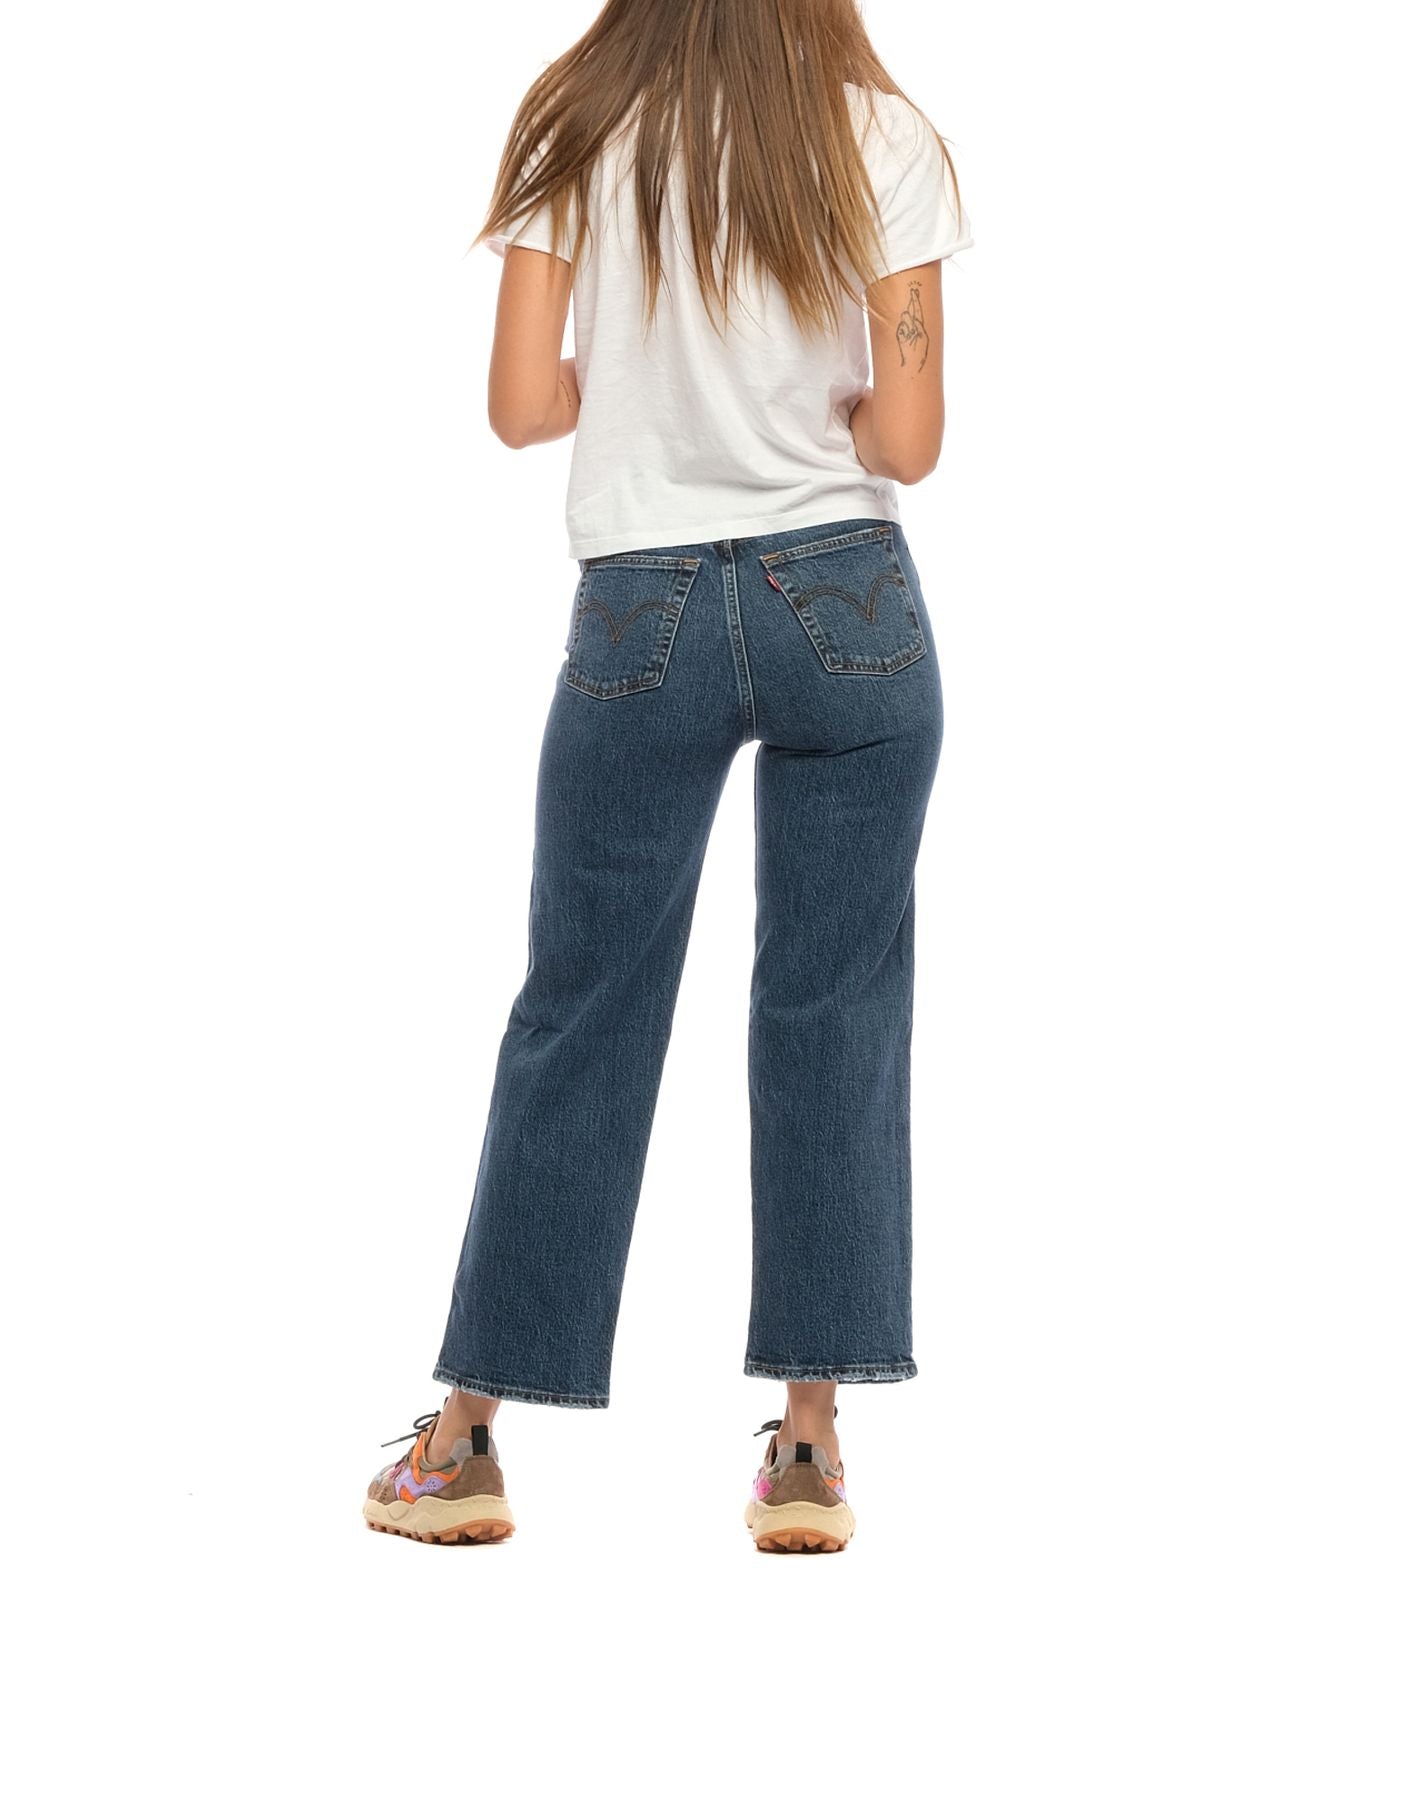 Jeans Frau 726930163 Valley View Levi's